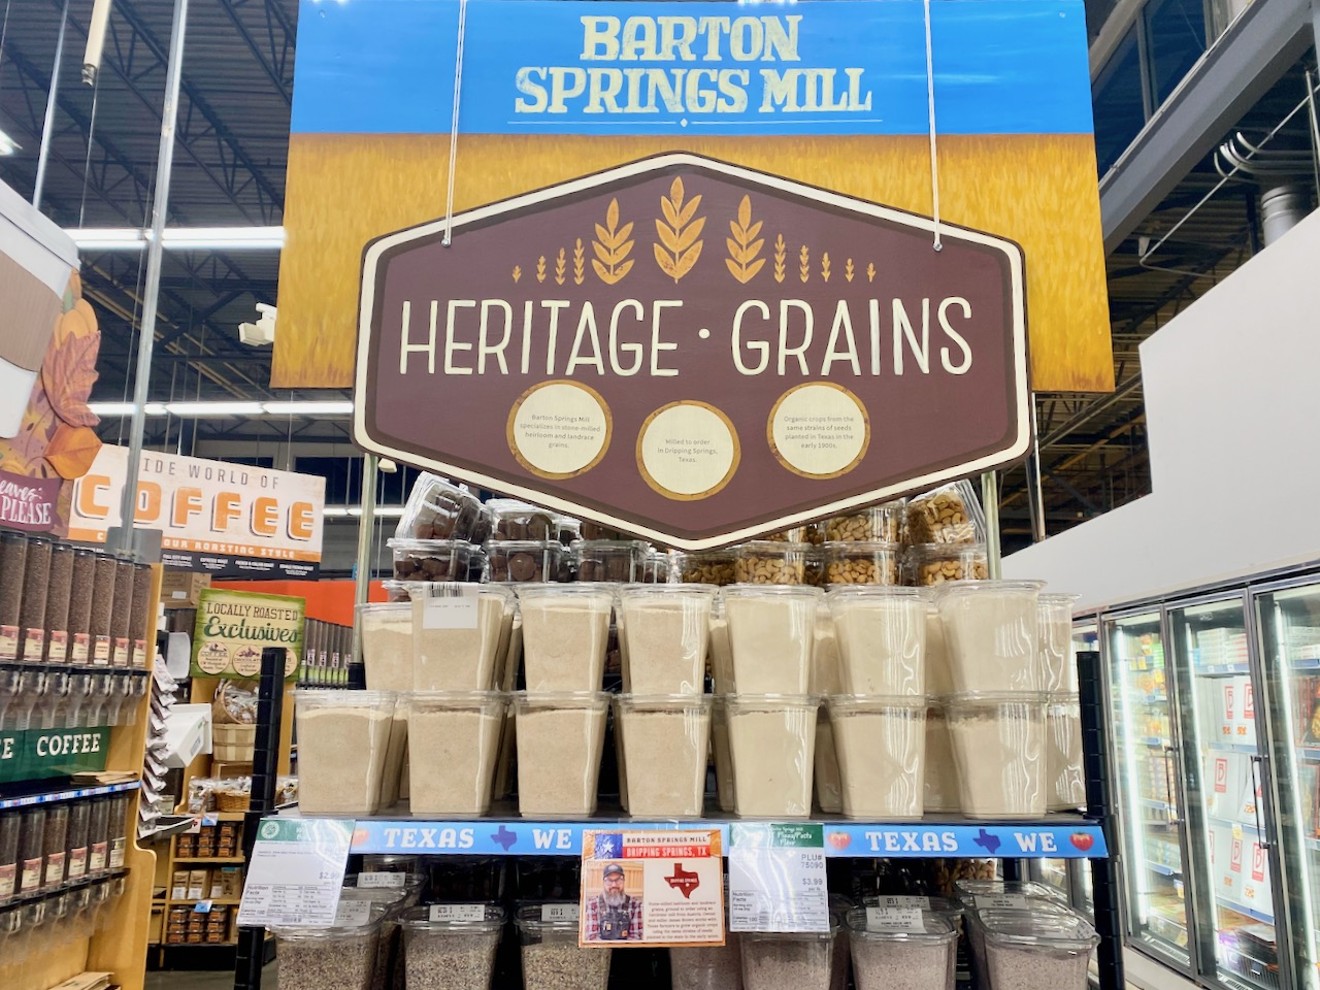 Stock up on heritage grains to get you through this cold spell.